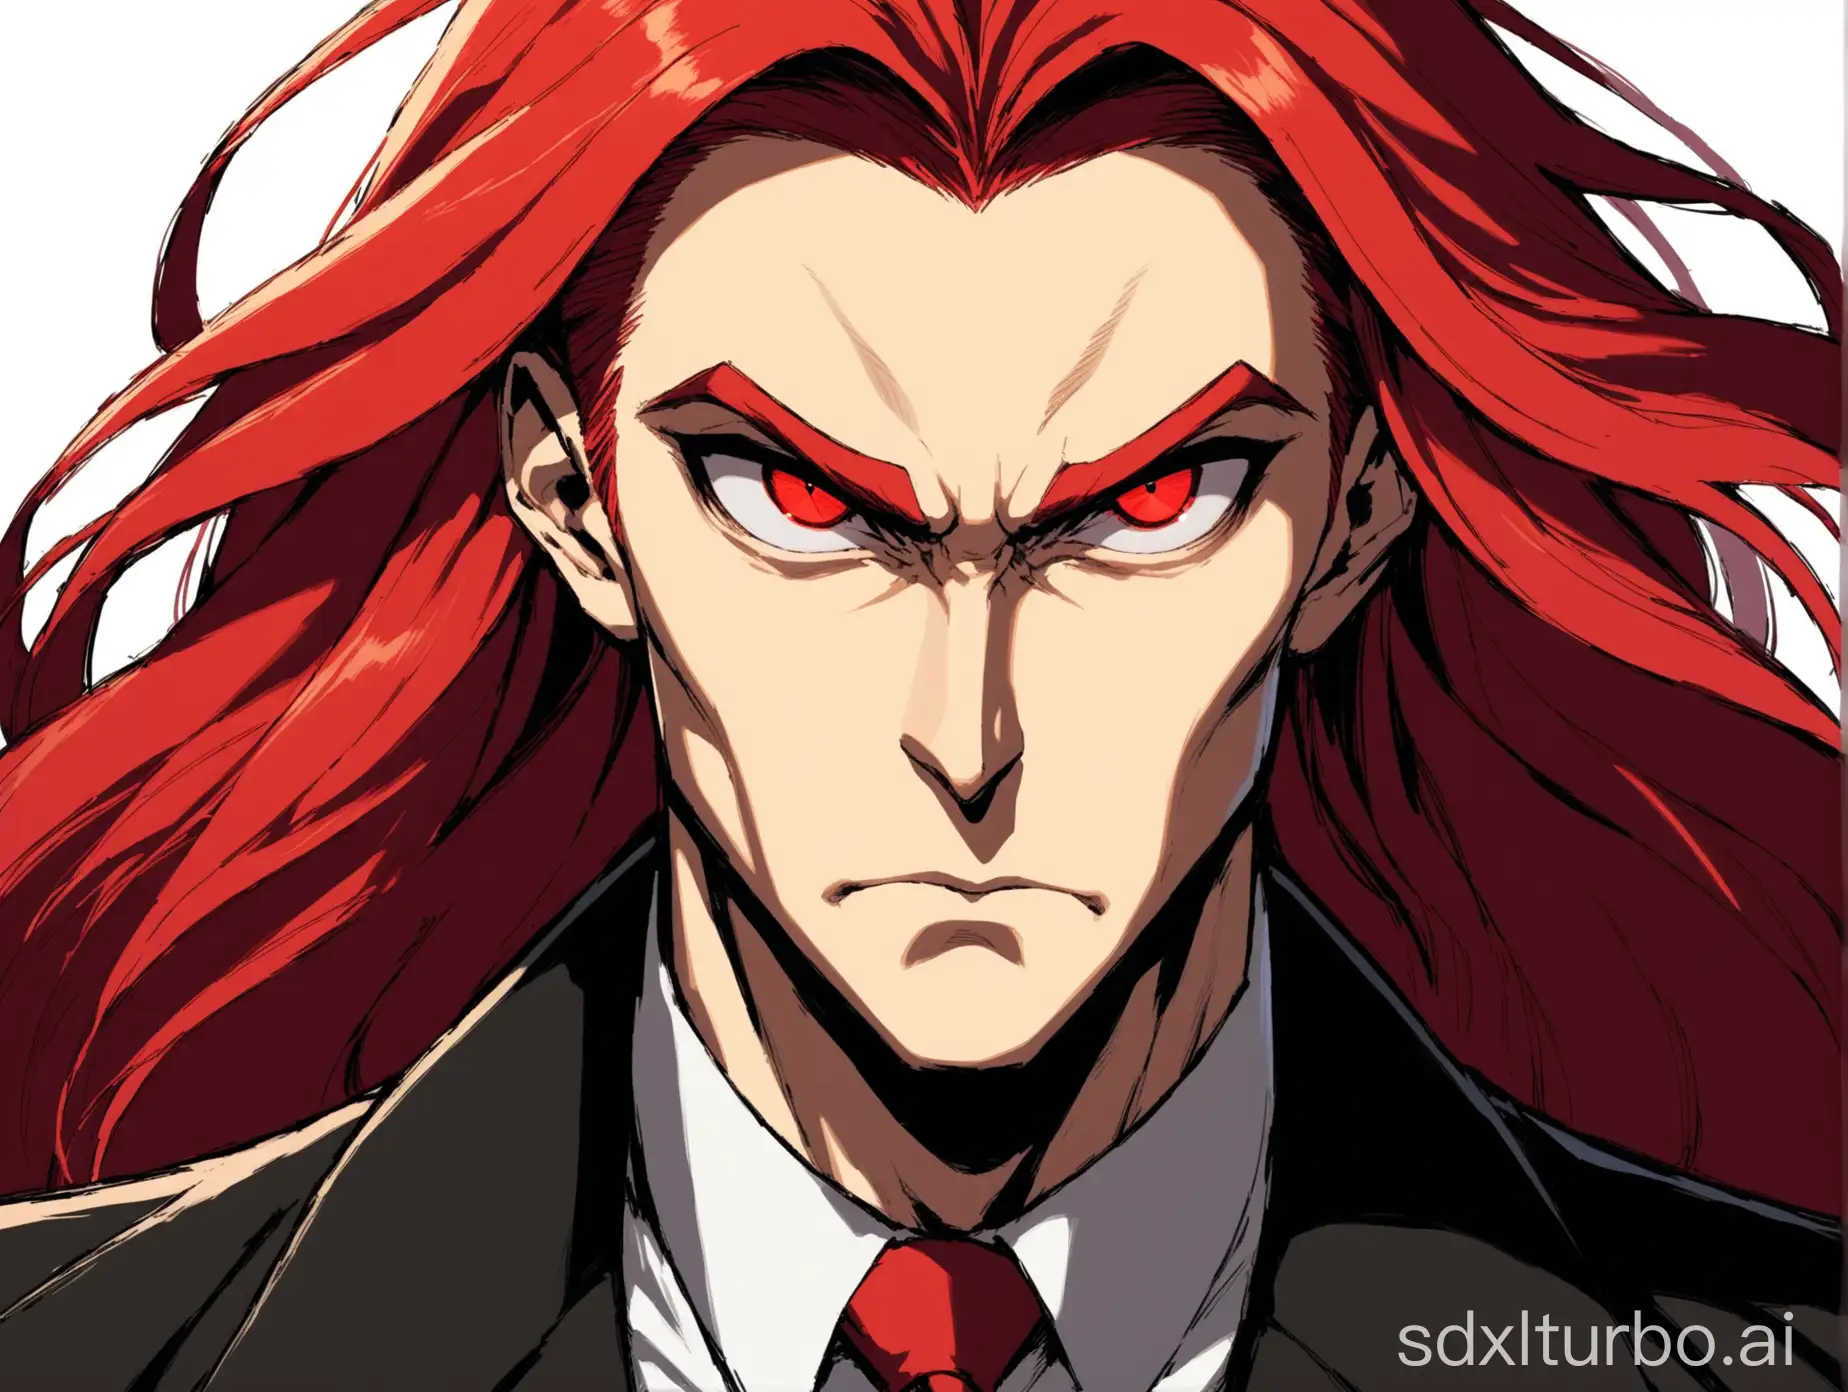 Man 40 years, red hair down to the shoulders, wavy hair, muing, big cheekbones, very narrow eyes, narrow eyes, villain, in a black jacket with a tie, thick red eyebrows, long hair, smooth forehead, elongated face, long face, voluminous hair, evil eyes, eyes slanted inward, strict gaze, glance from under the brow, wide cheekbones